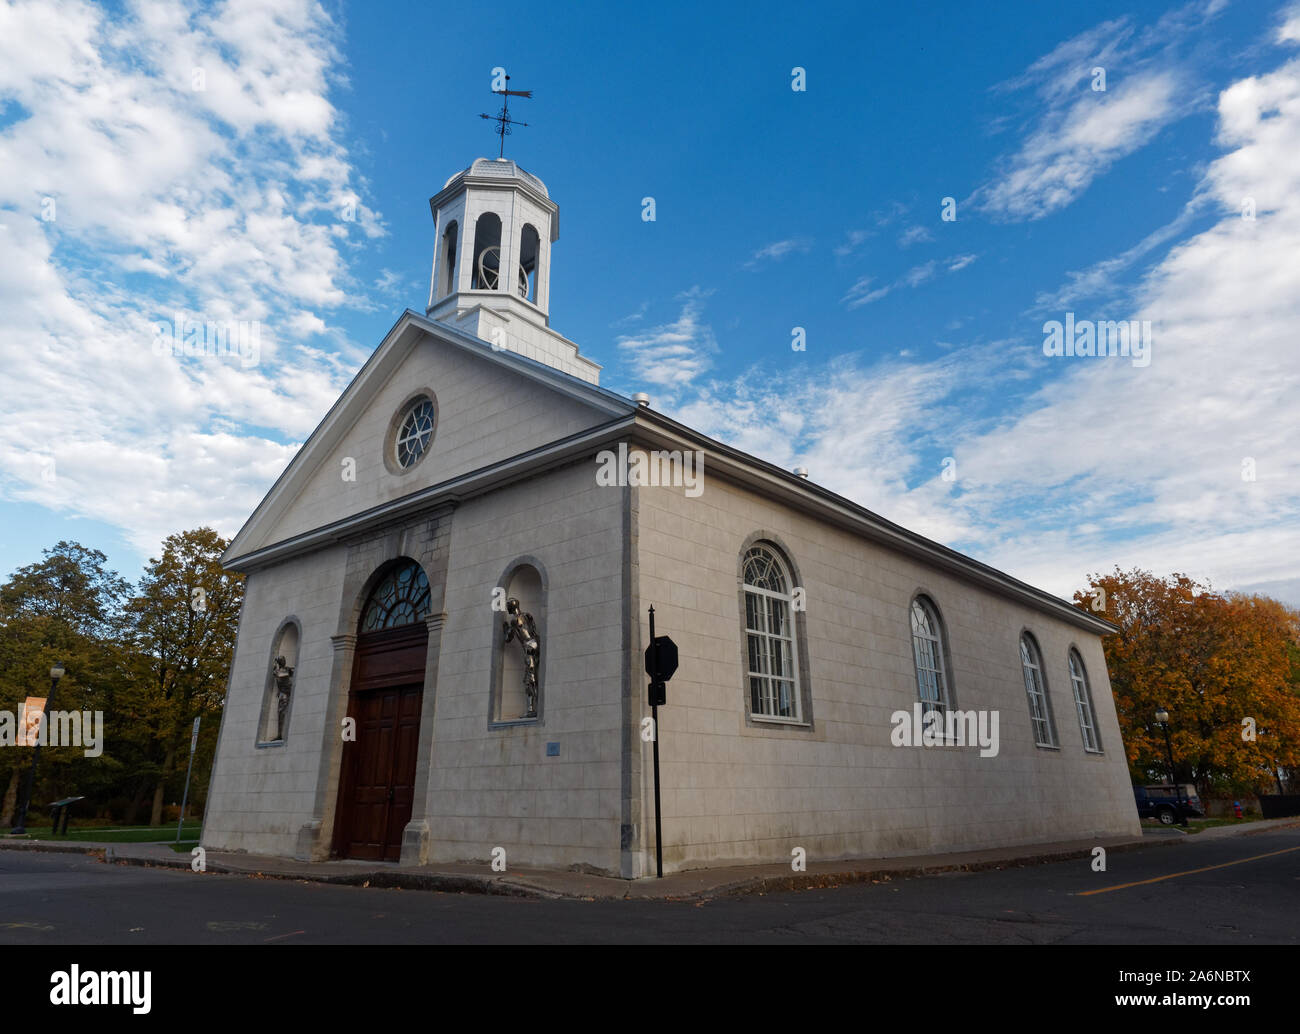 Quebec,Canada. The St. James church in Tois-Rivieres. Built by the first missionaries to New France, this Anglican church is known for its historical Stock Photo